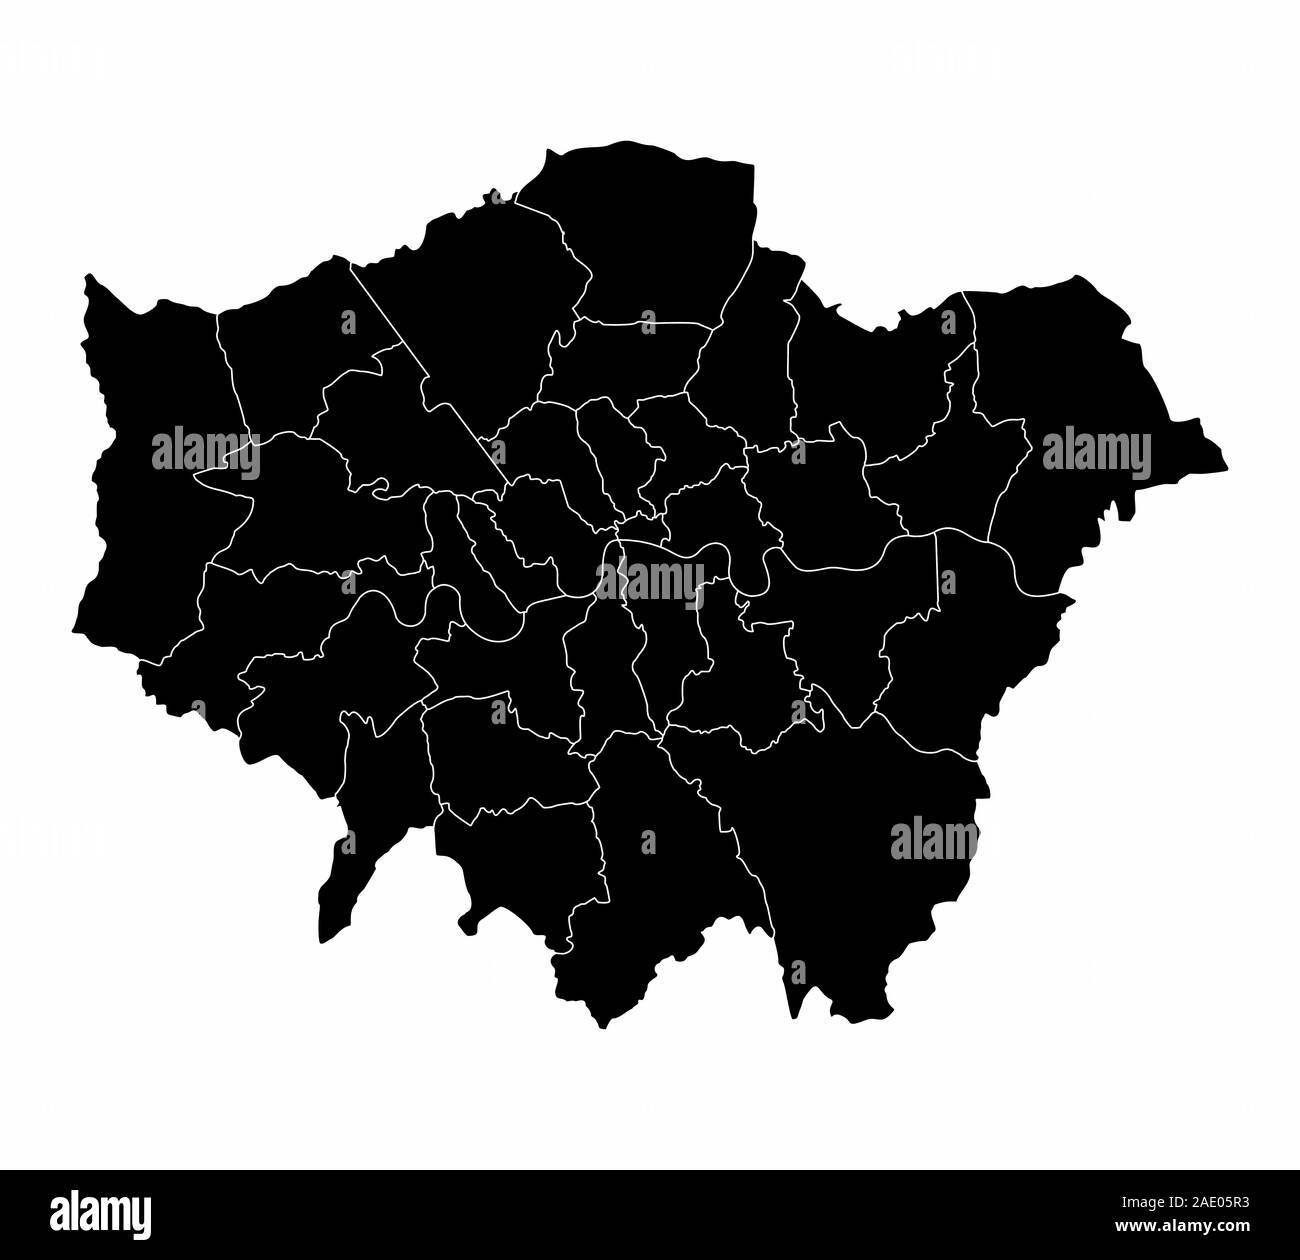 Greater London silhouette map Stock Vector